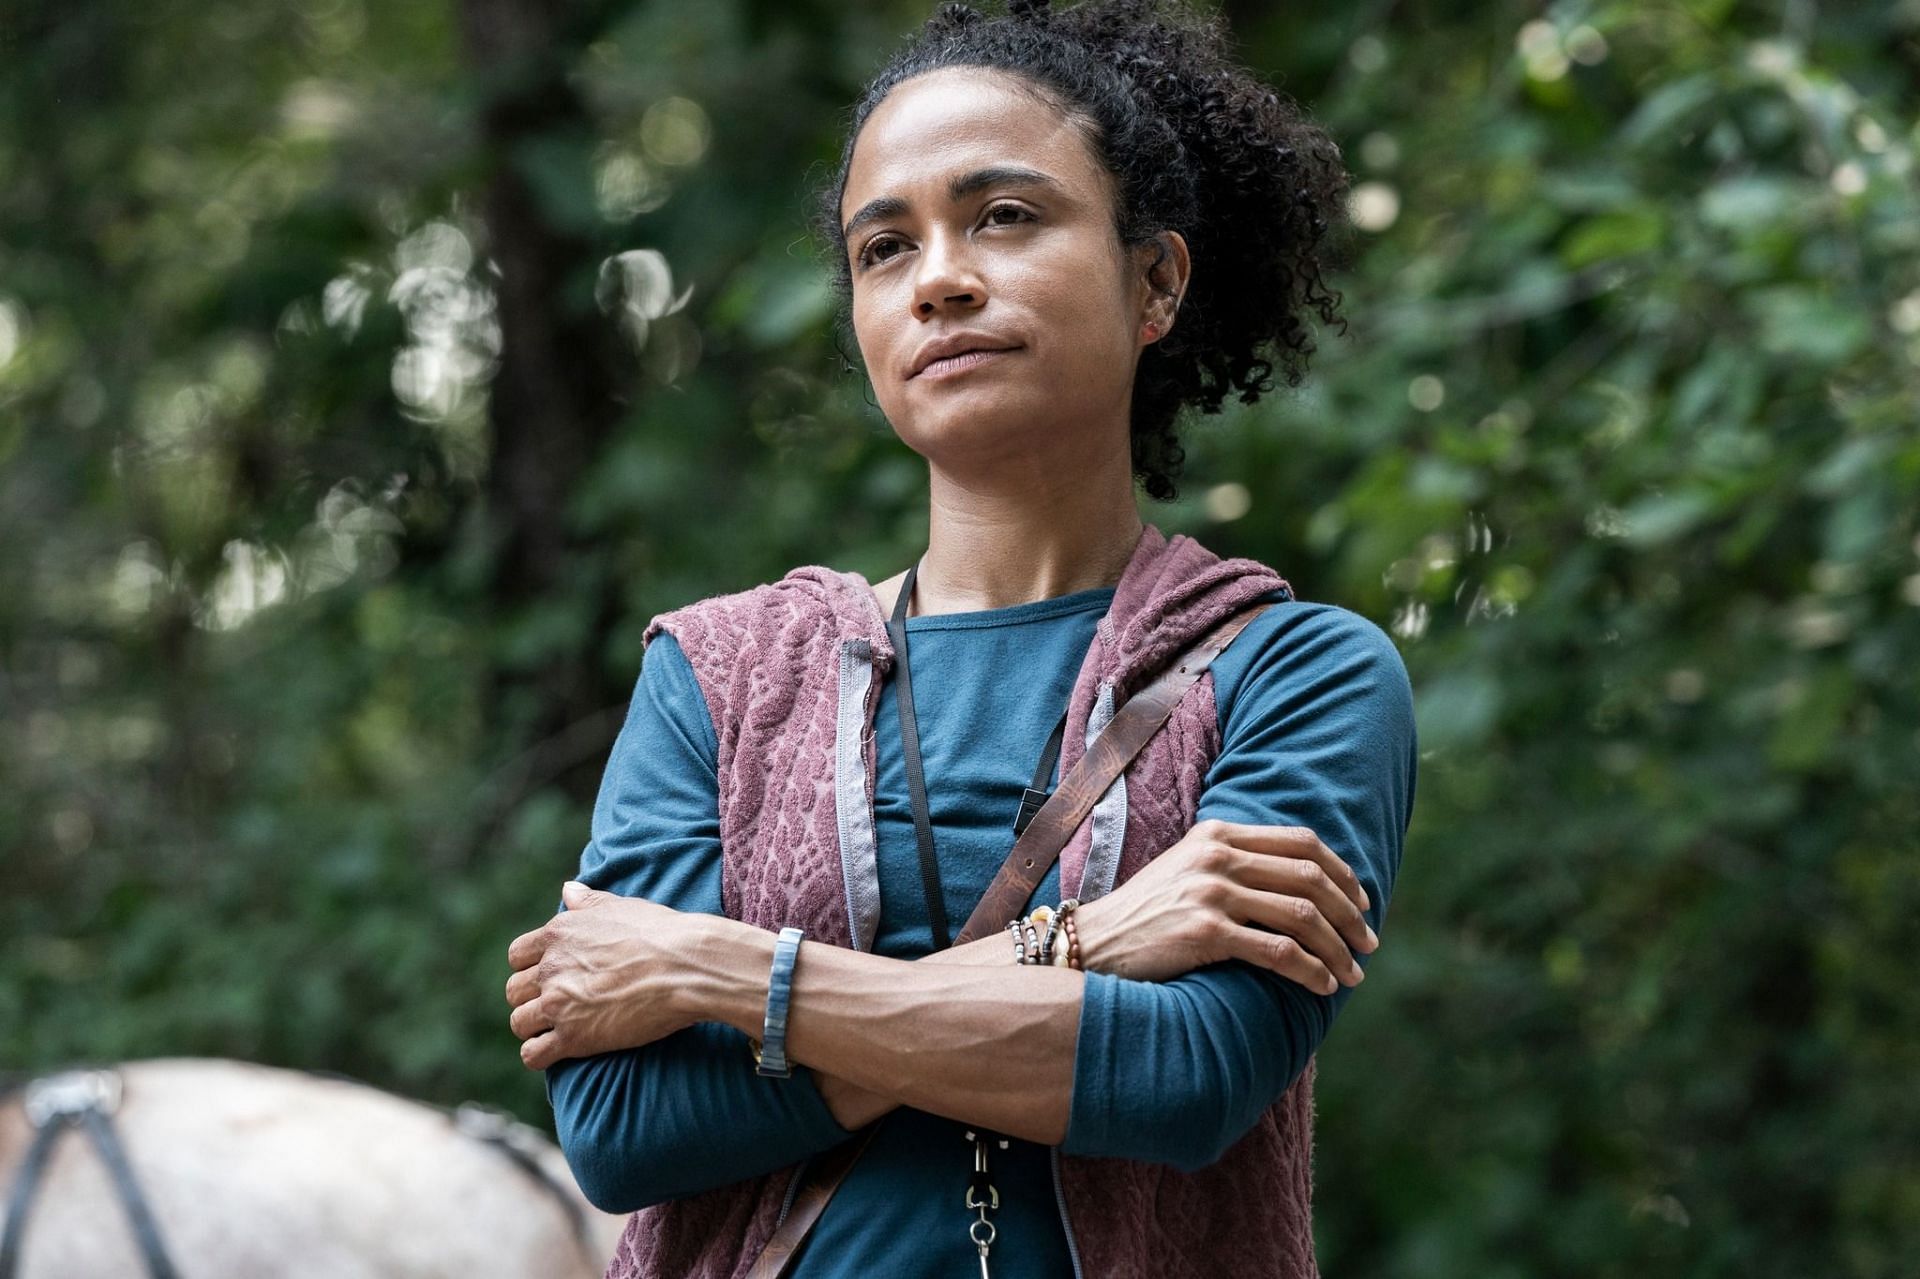 Lauren Ridloff as Connie (Picture sourced from official Facebook page)